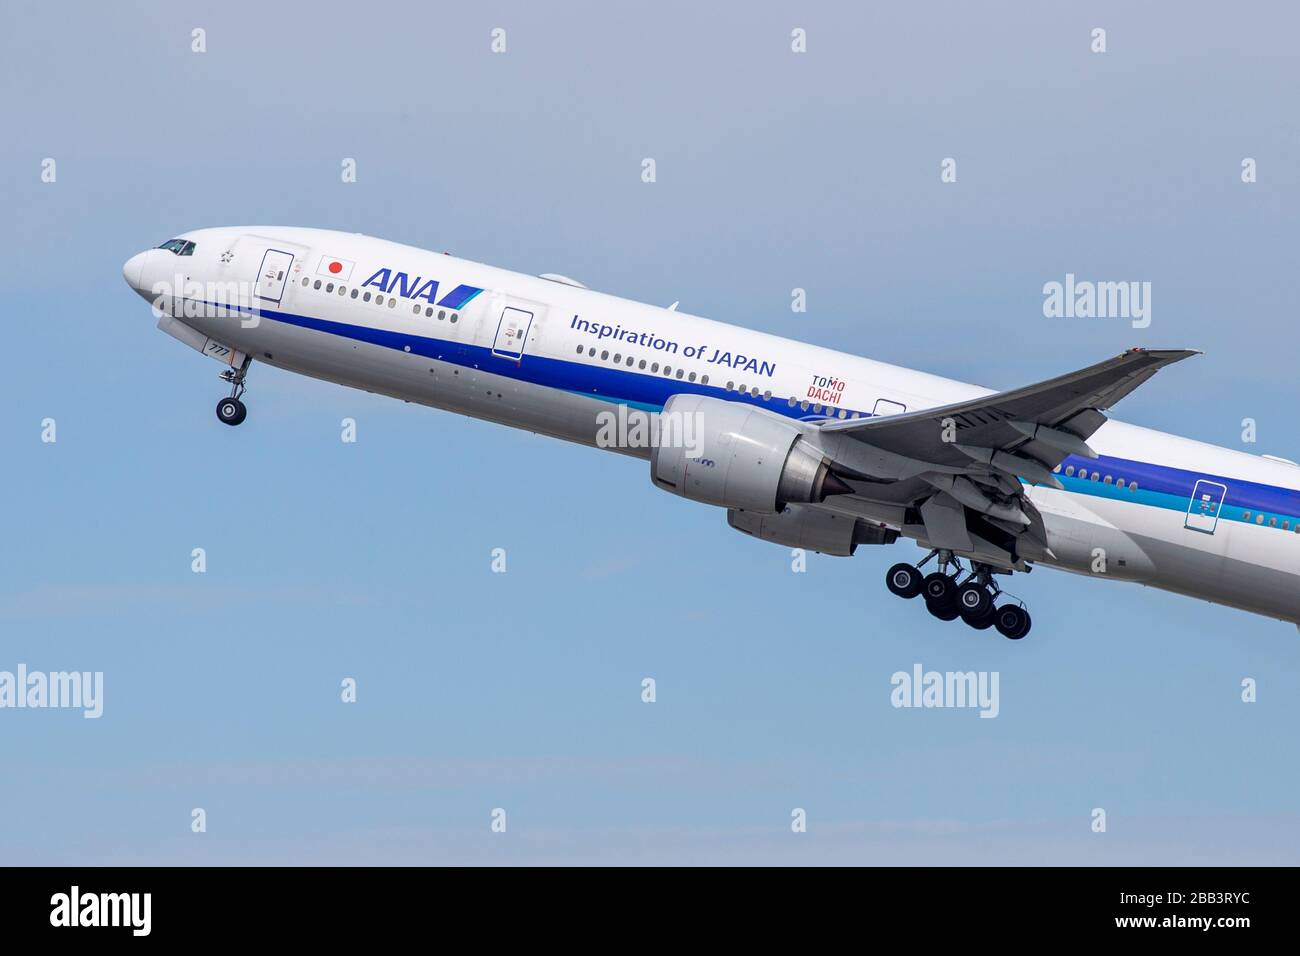 An Ana Boeing 777 300ew Aircraft Takes Off For Tokyo Los Angeles International Airport Lax On Friday February 28 In Los Angeles California Usa Photo By Ios Espa Images Stock Photo Alamy